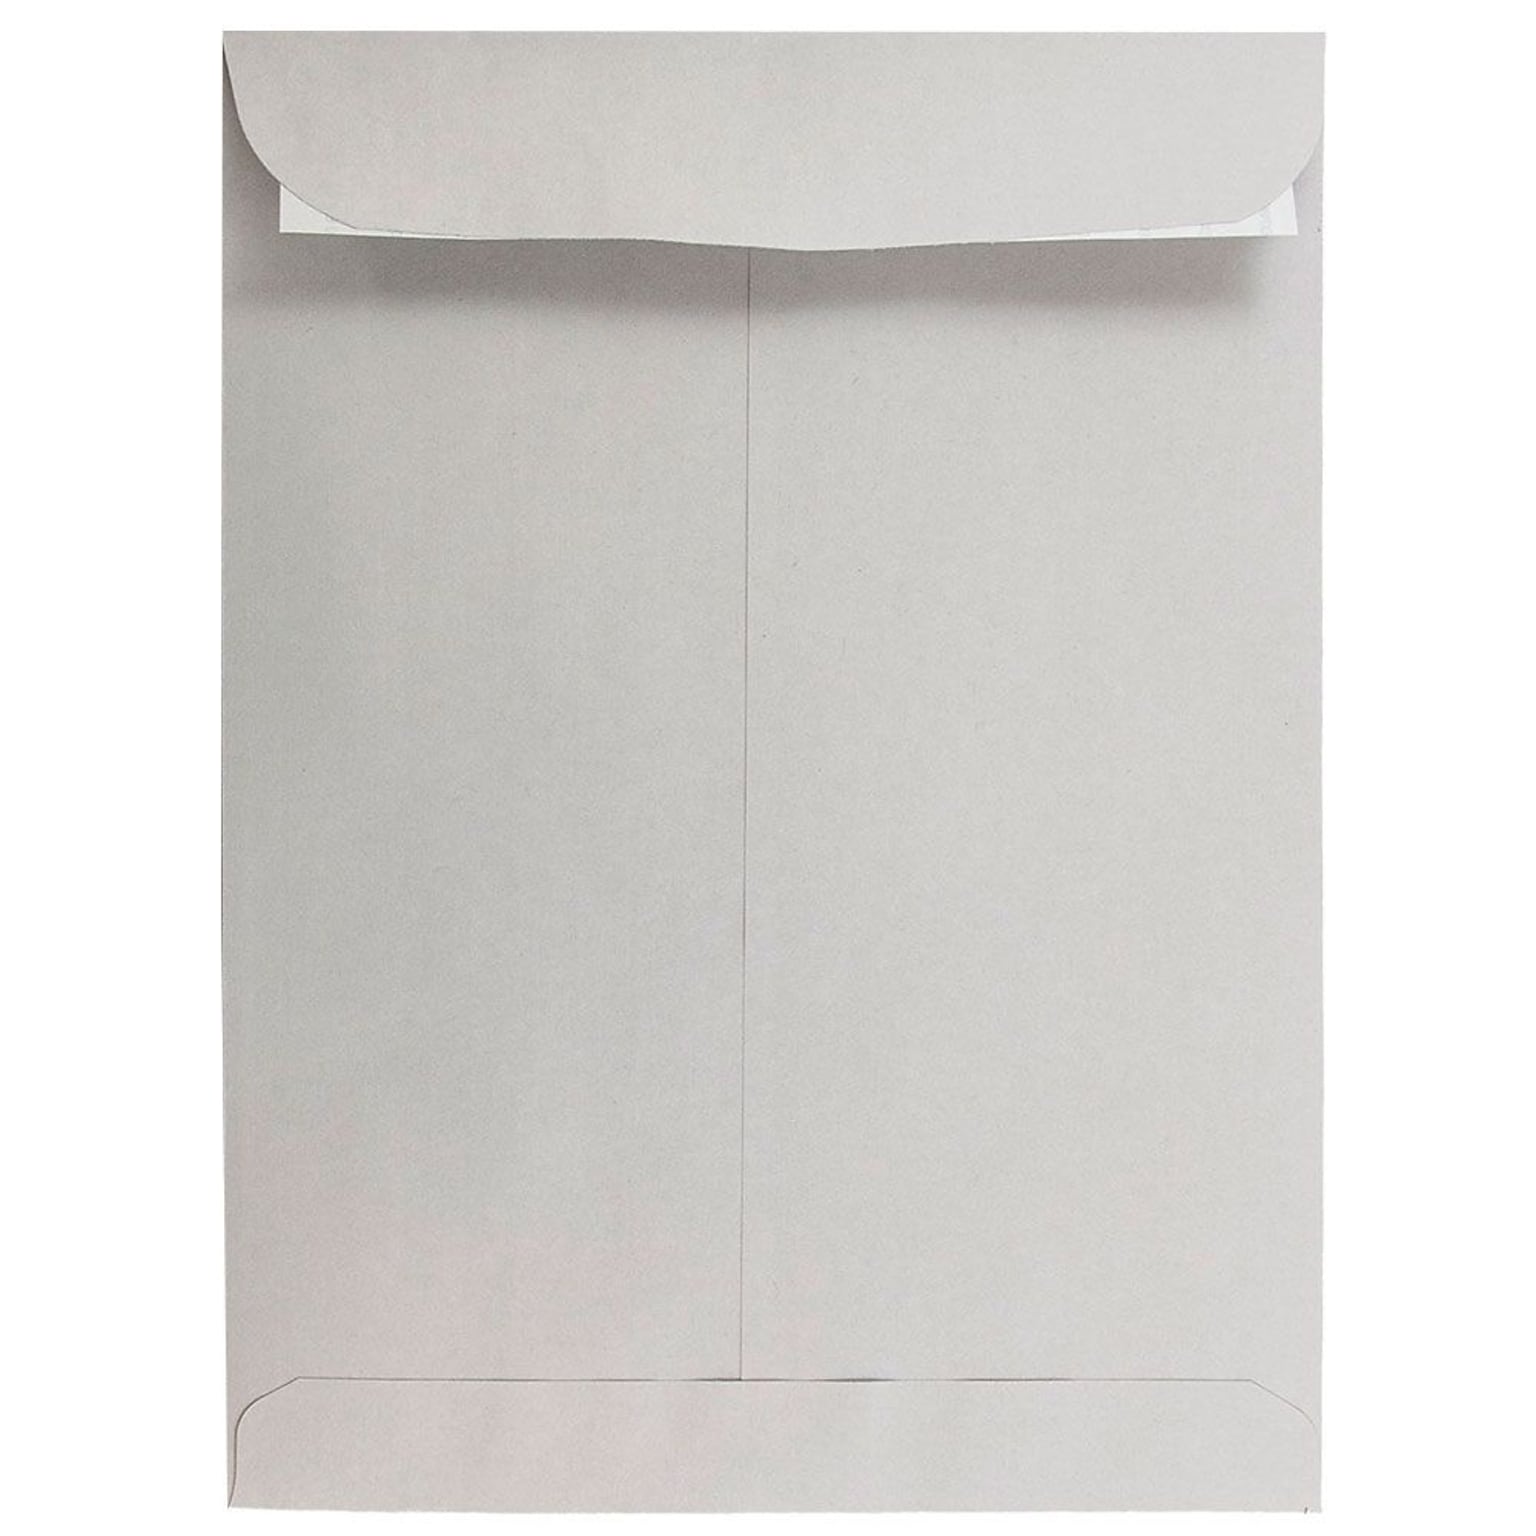 JAM Paper 9 x 12 Open End Catalog Envelopes with Peel and Seal Closure, Light Grey, 50/Pack (12931115i)